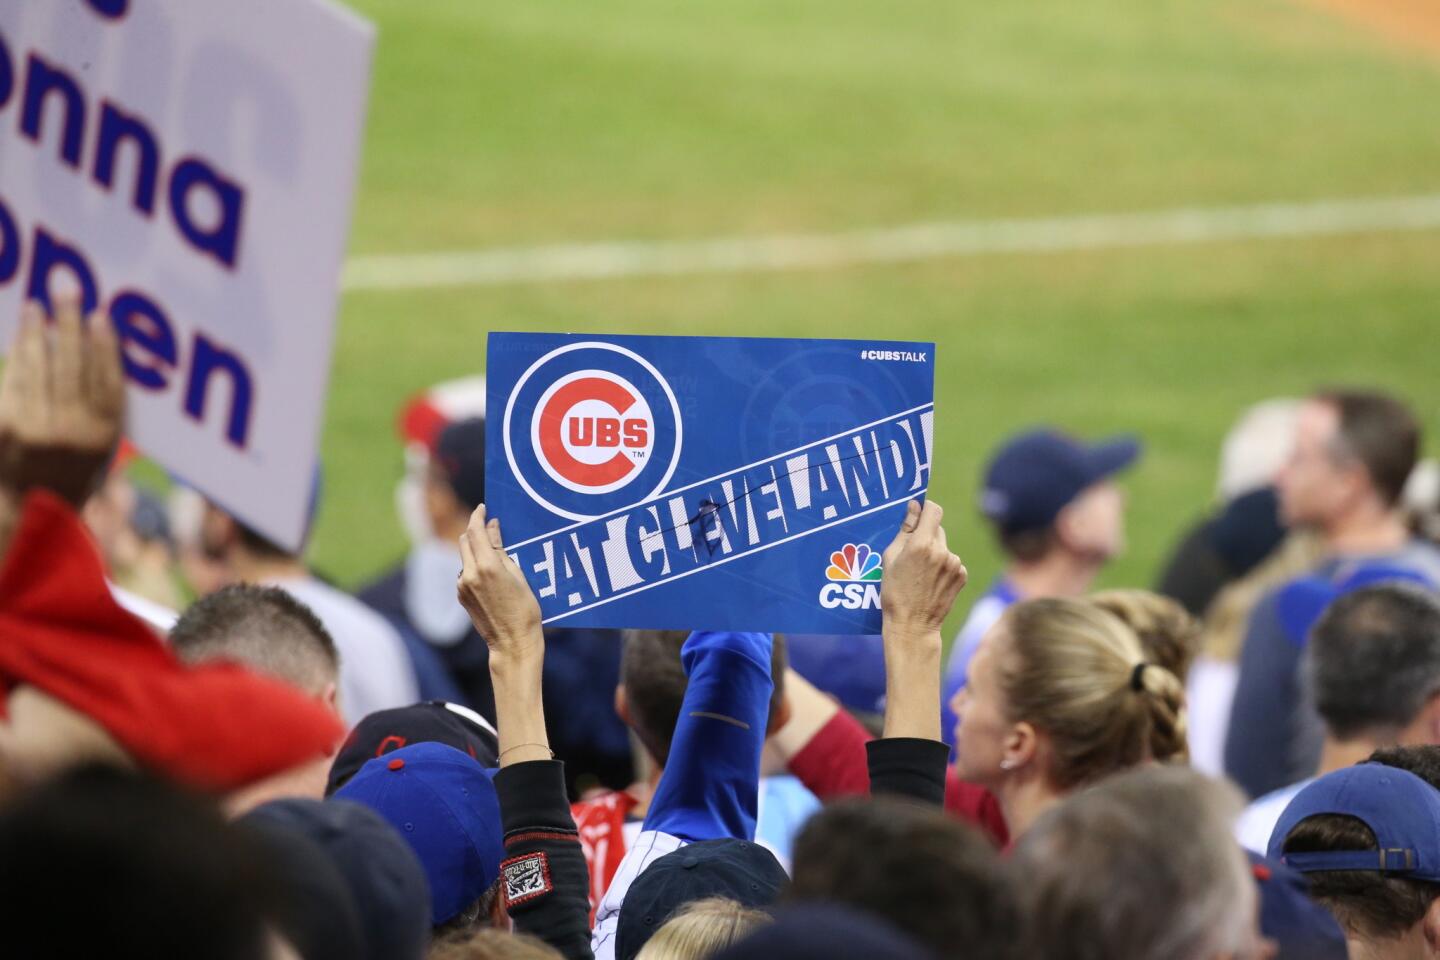 Cubs fans elated after World Series win